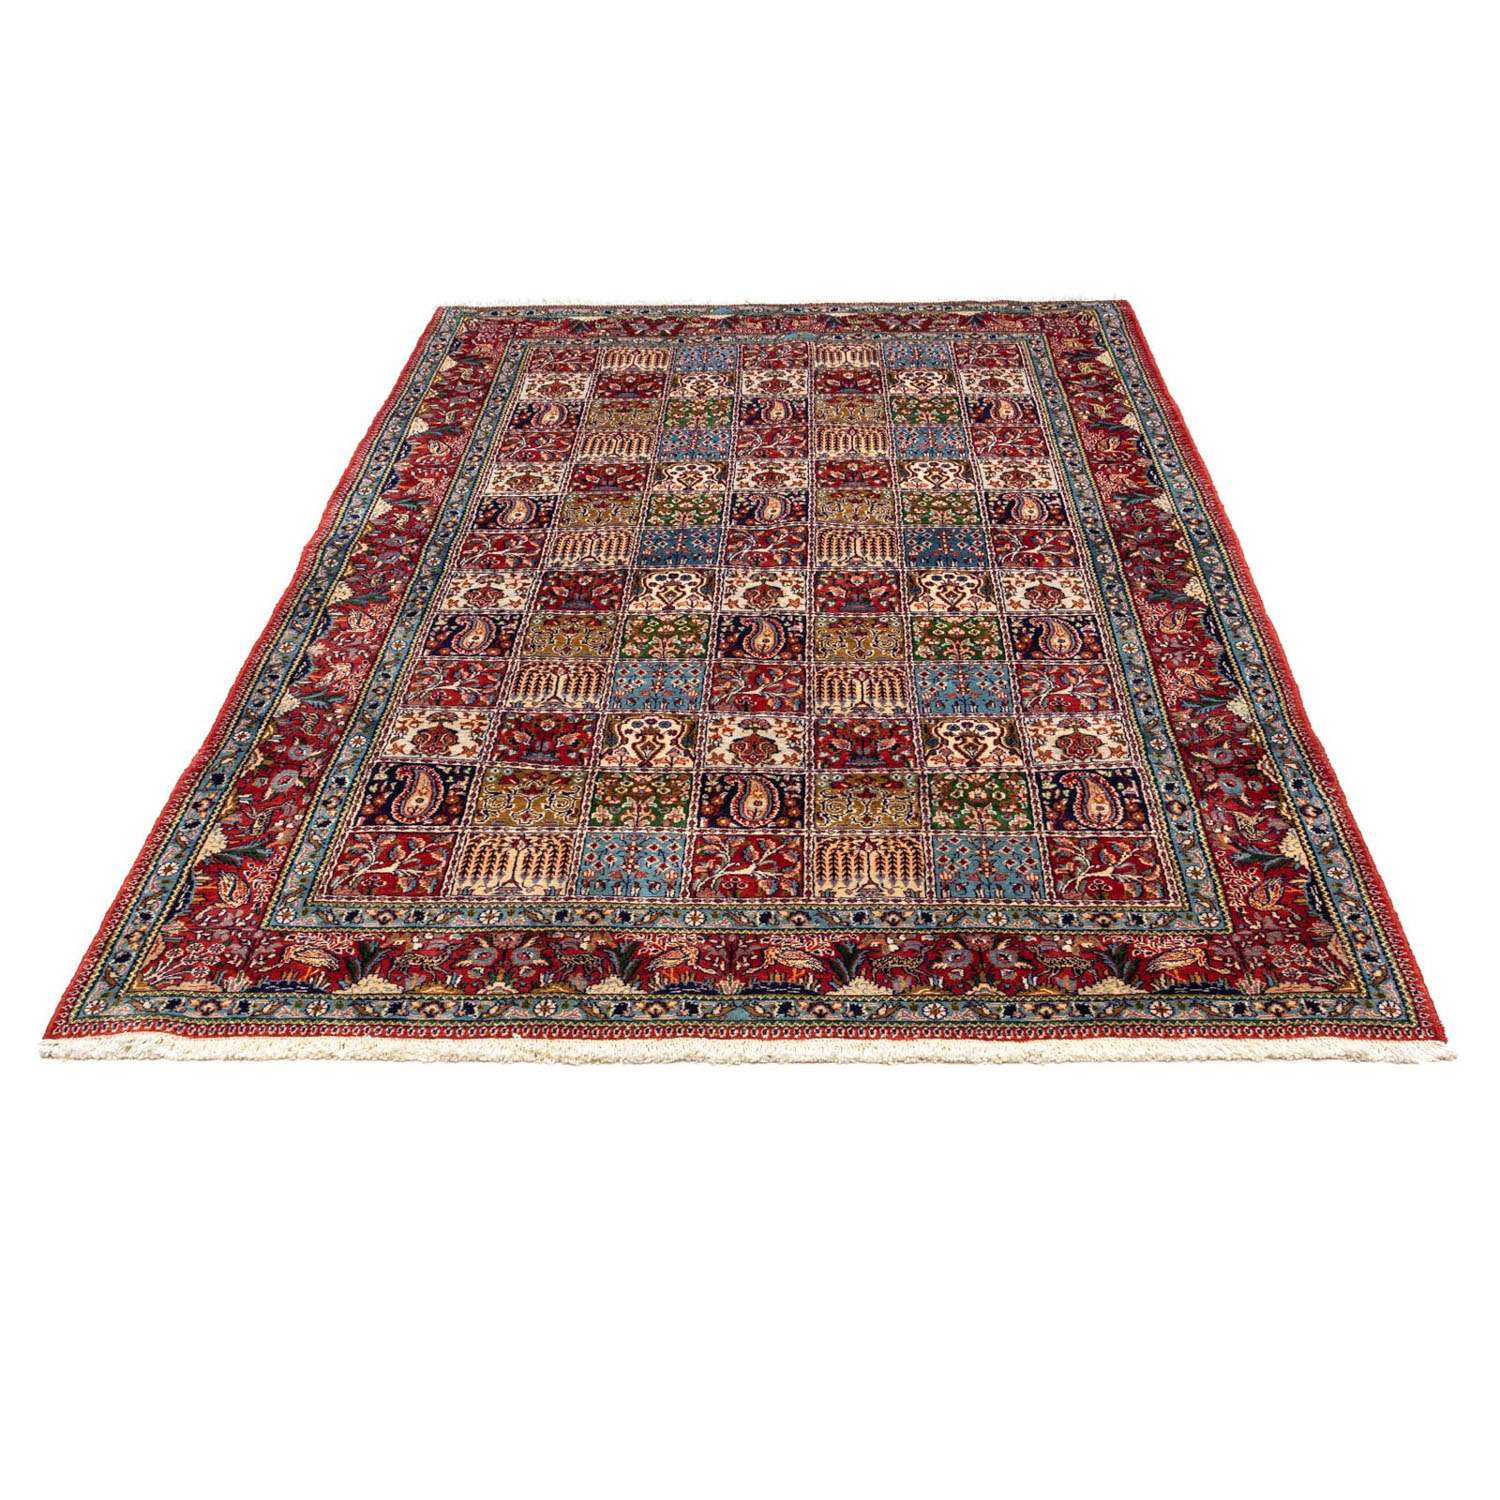 Perser Rug - Classic - 251 x 162 cm - red